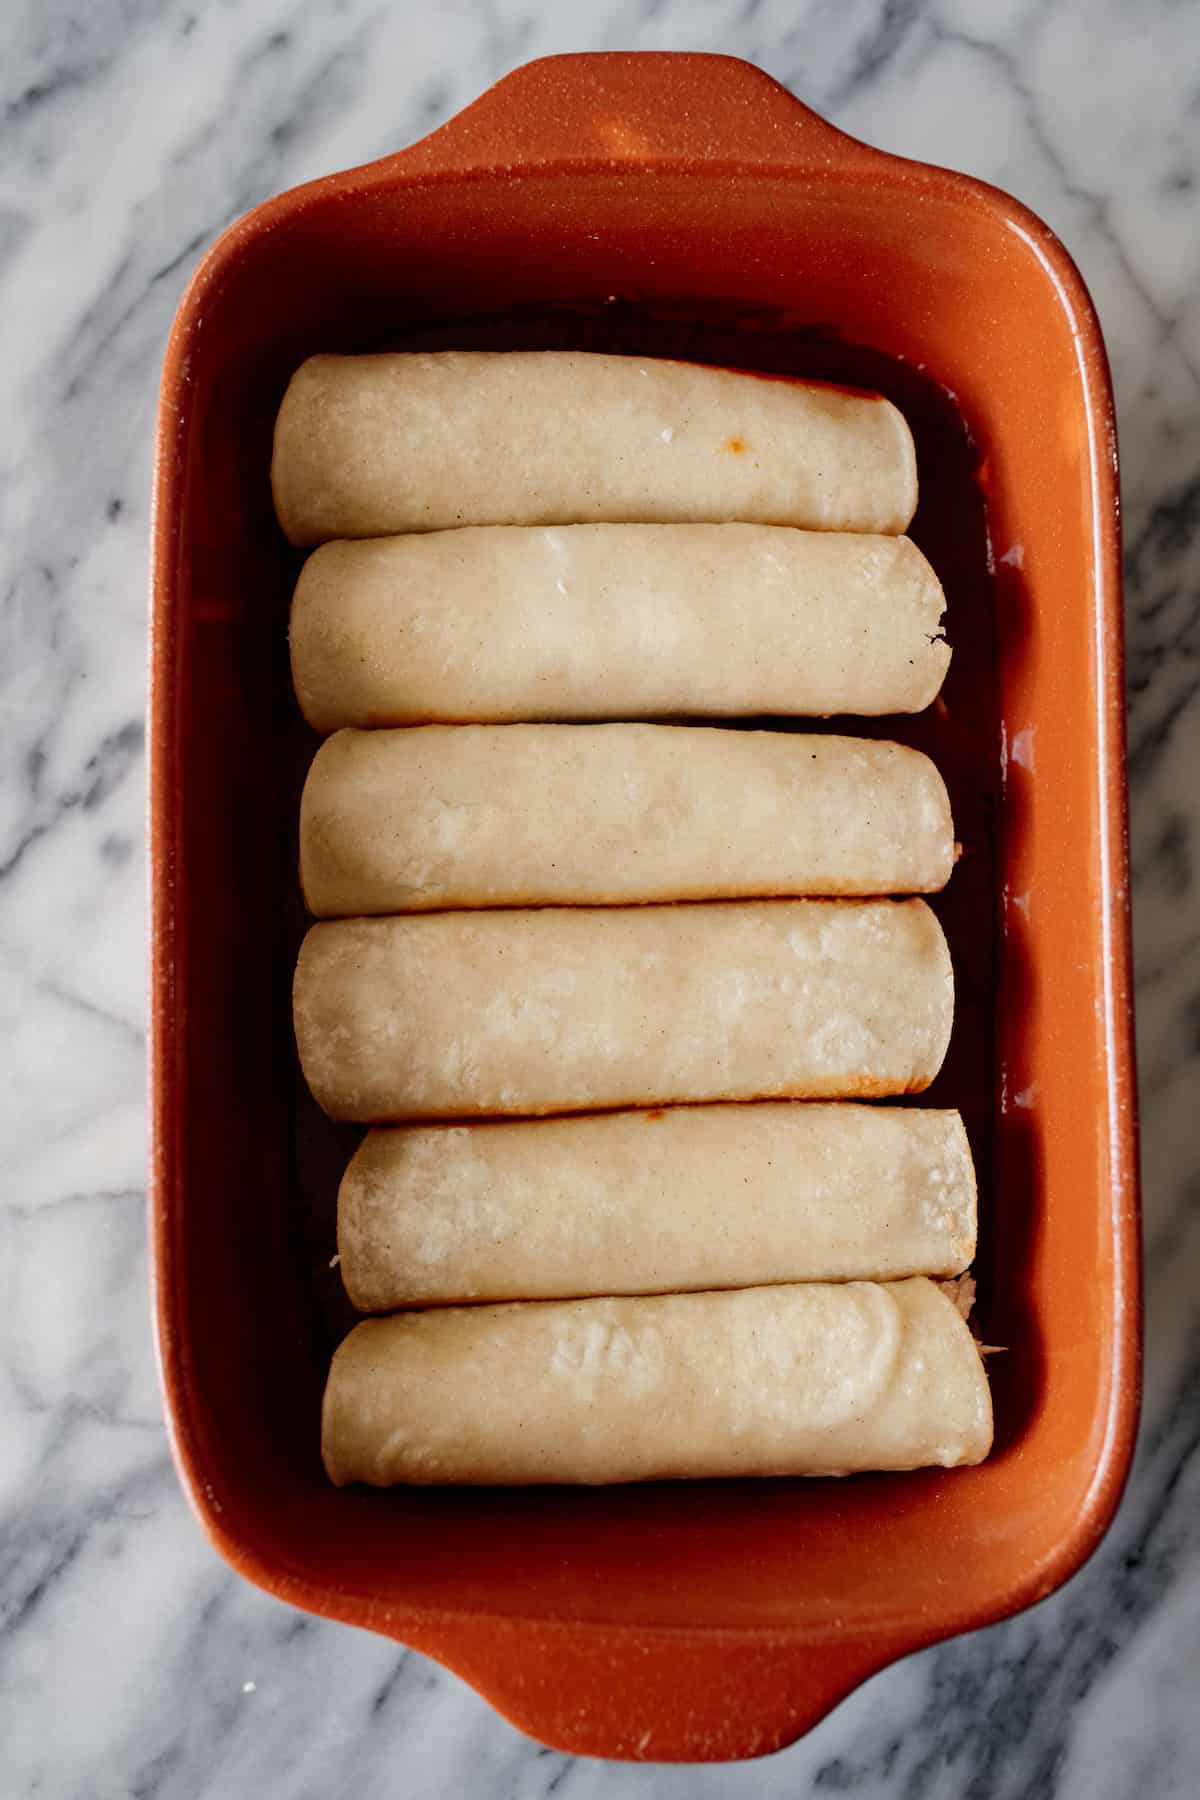 6 homemade easy chicken enchiladas in a terra cotta 9 x 13 baking dish before being covered with enchilada sauce and baked.